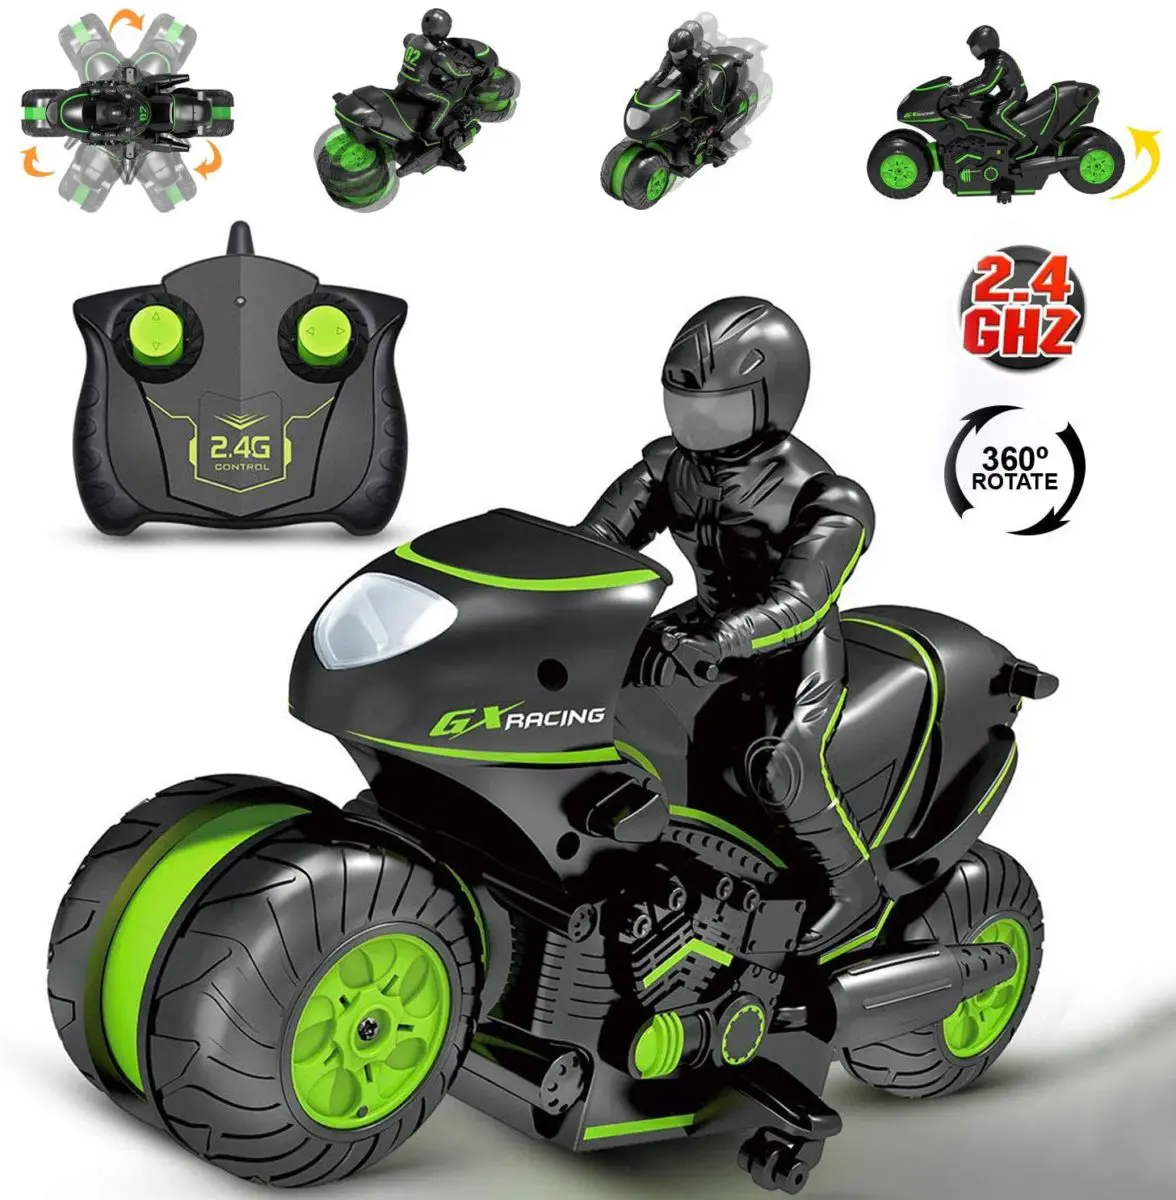 Remote Control Motorcycle - Top Toys and Gifts for Nine Year Old Boys 1